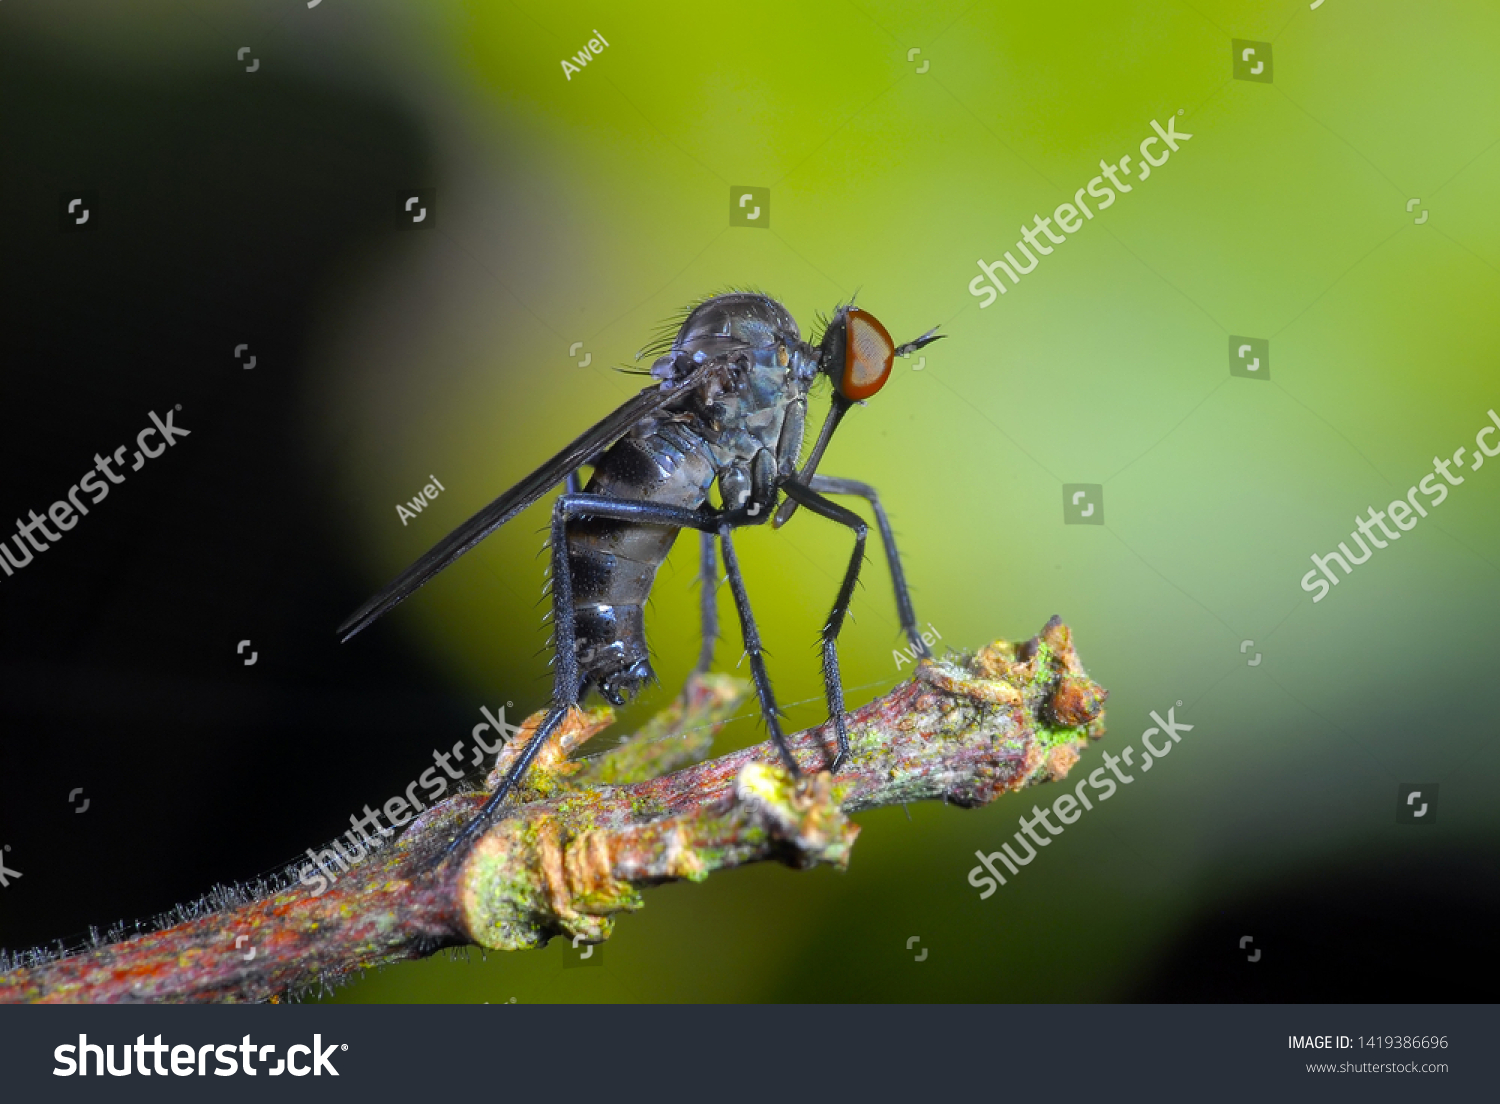 The insectivorous gadfly perches on the field plants #1419386696